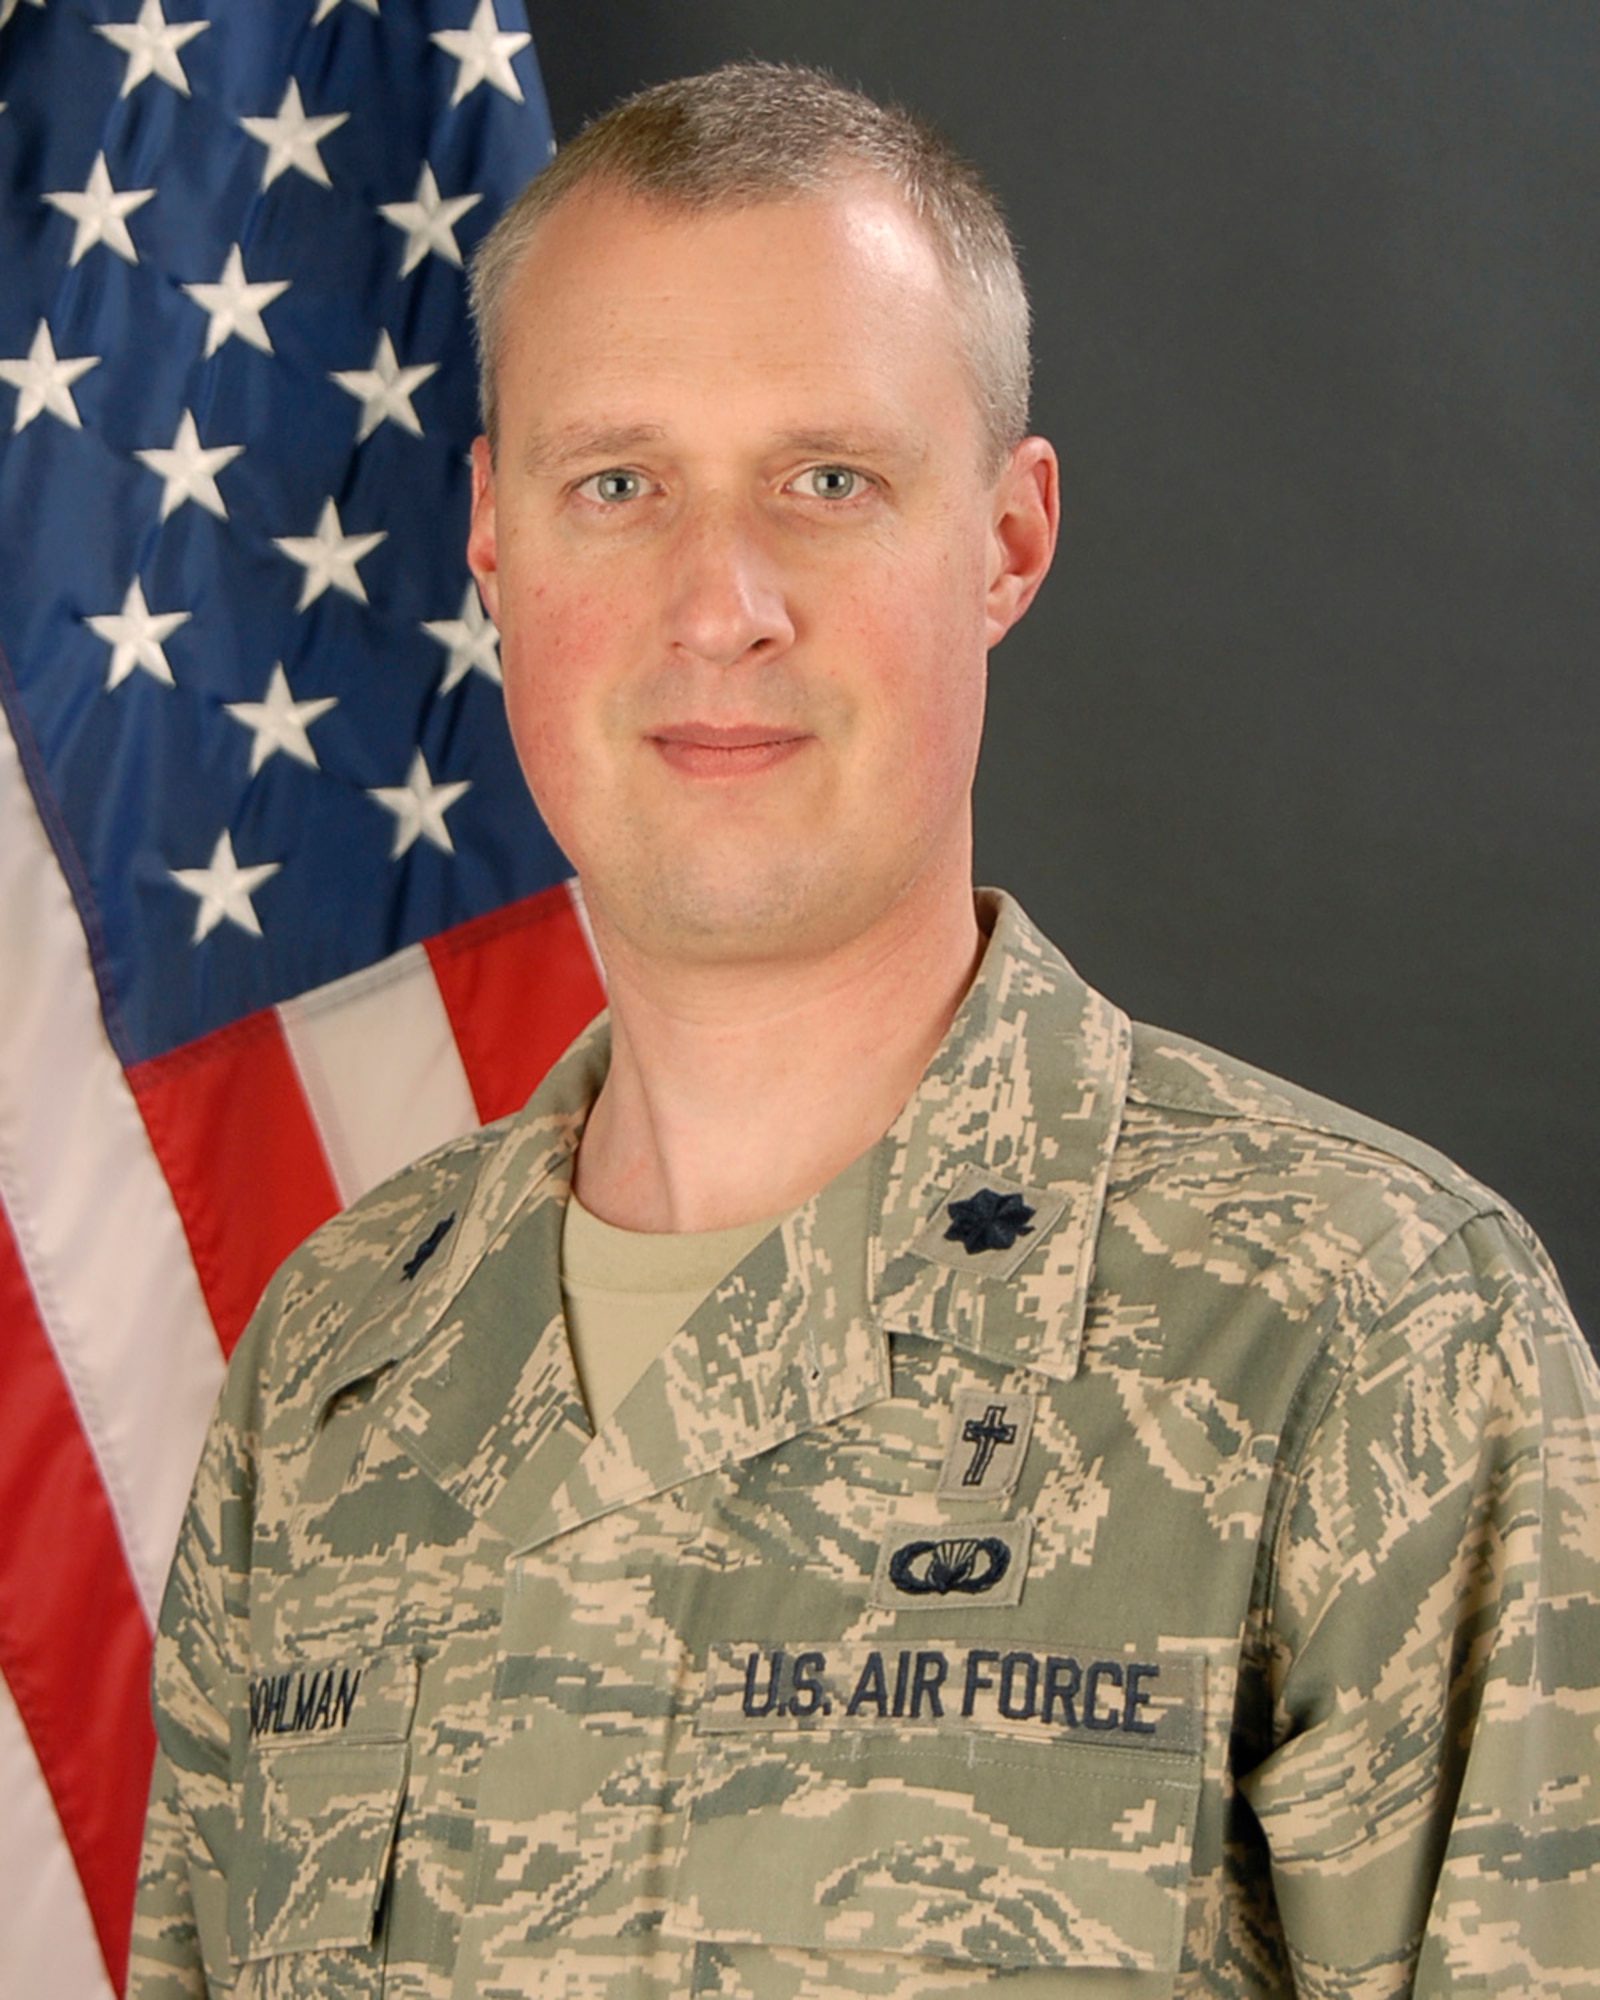 Lt. Col. Brian Bohlman, 169th Fighter Wing Chaplain at McEntire JNGB, S.C., February 1, 2012.
(National Guard photo by Tech. Sgt. Caycee Watson/Released)